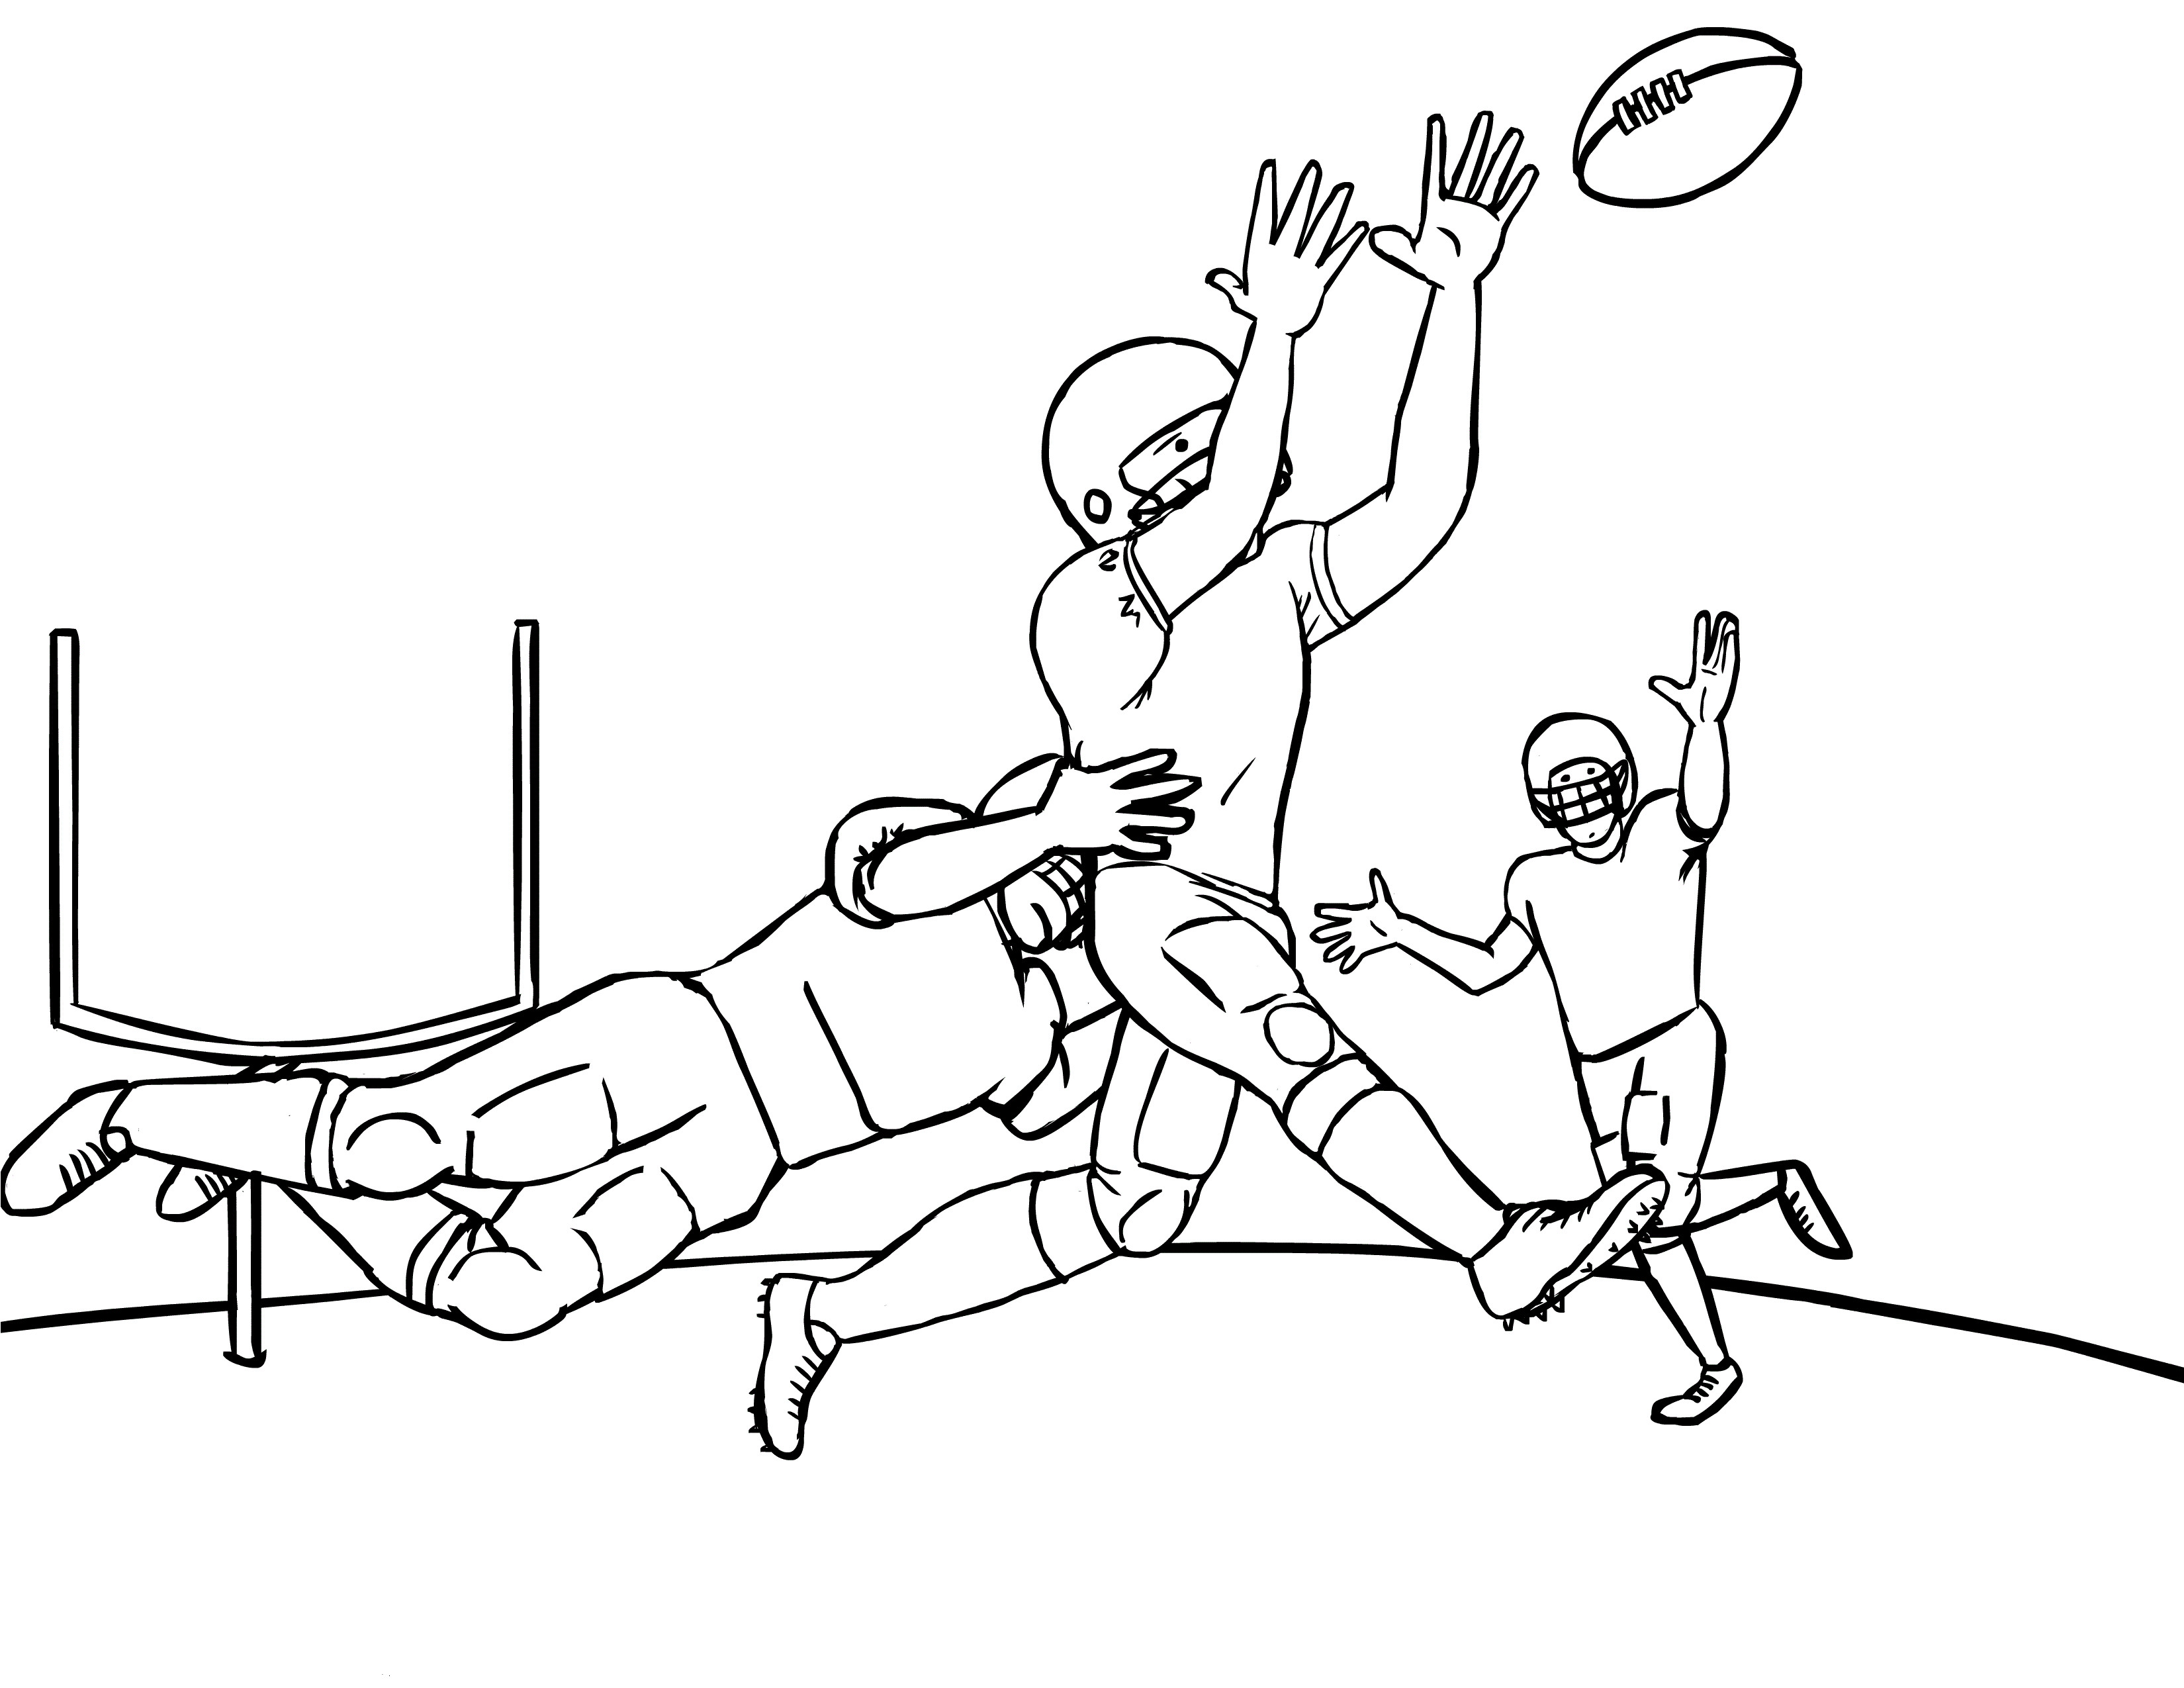 Coloring Pages For Boys Bears Football
 Free Printable Football Coloring Pages for Kids Best